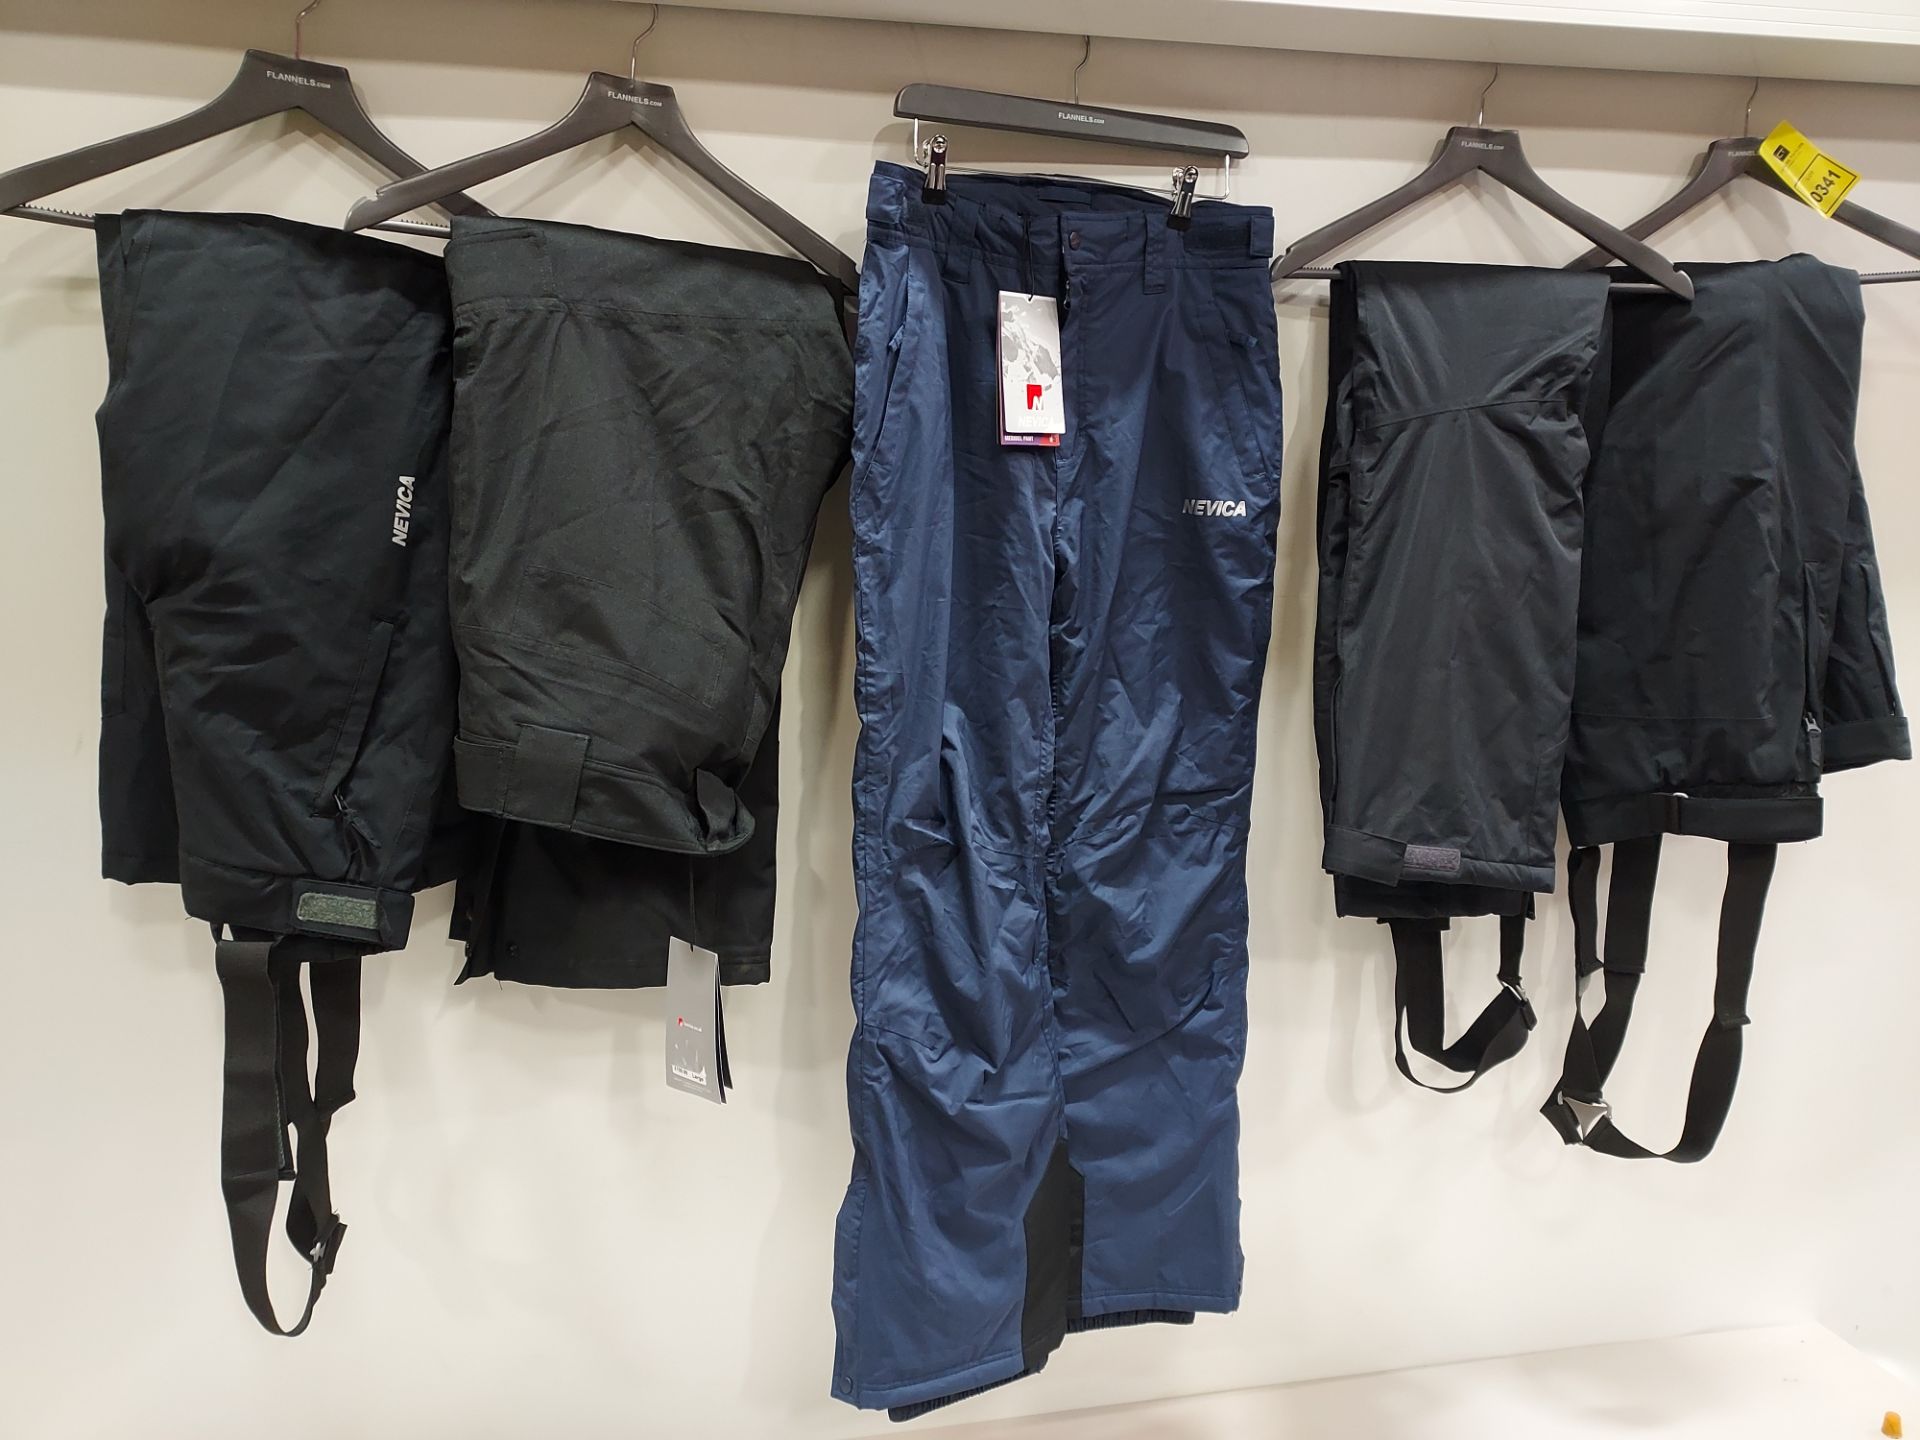 5 X BRAND NEW SKI PANTS IN VARIOUS STYLES AND SIZES TO INCLUDE 1 X NEVICA MERIBEL NAVY PANTS IN SIZE